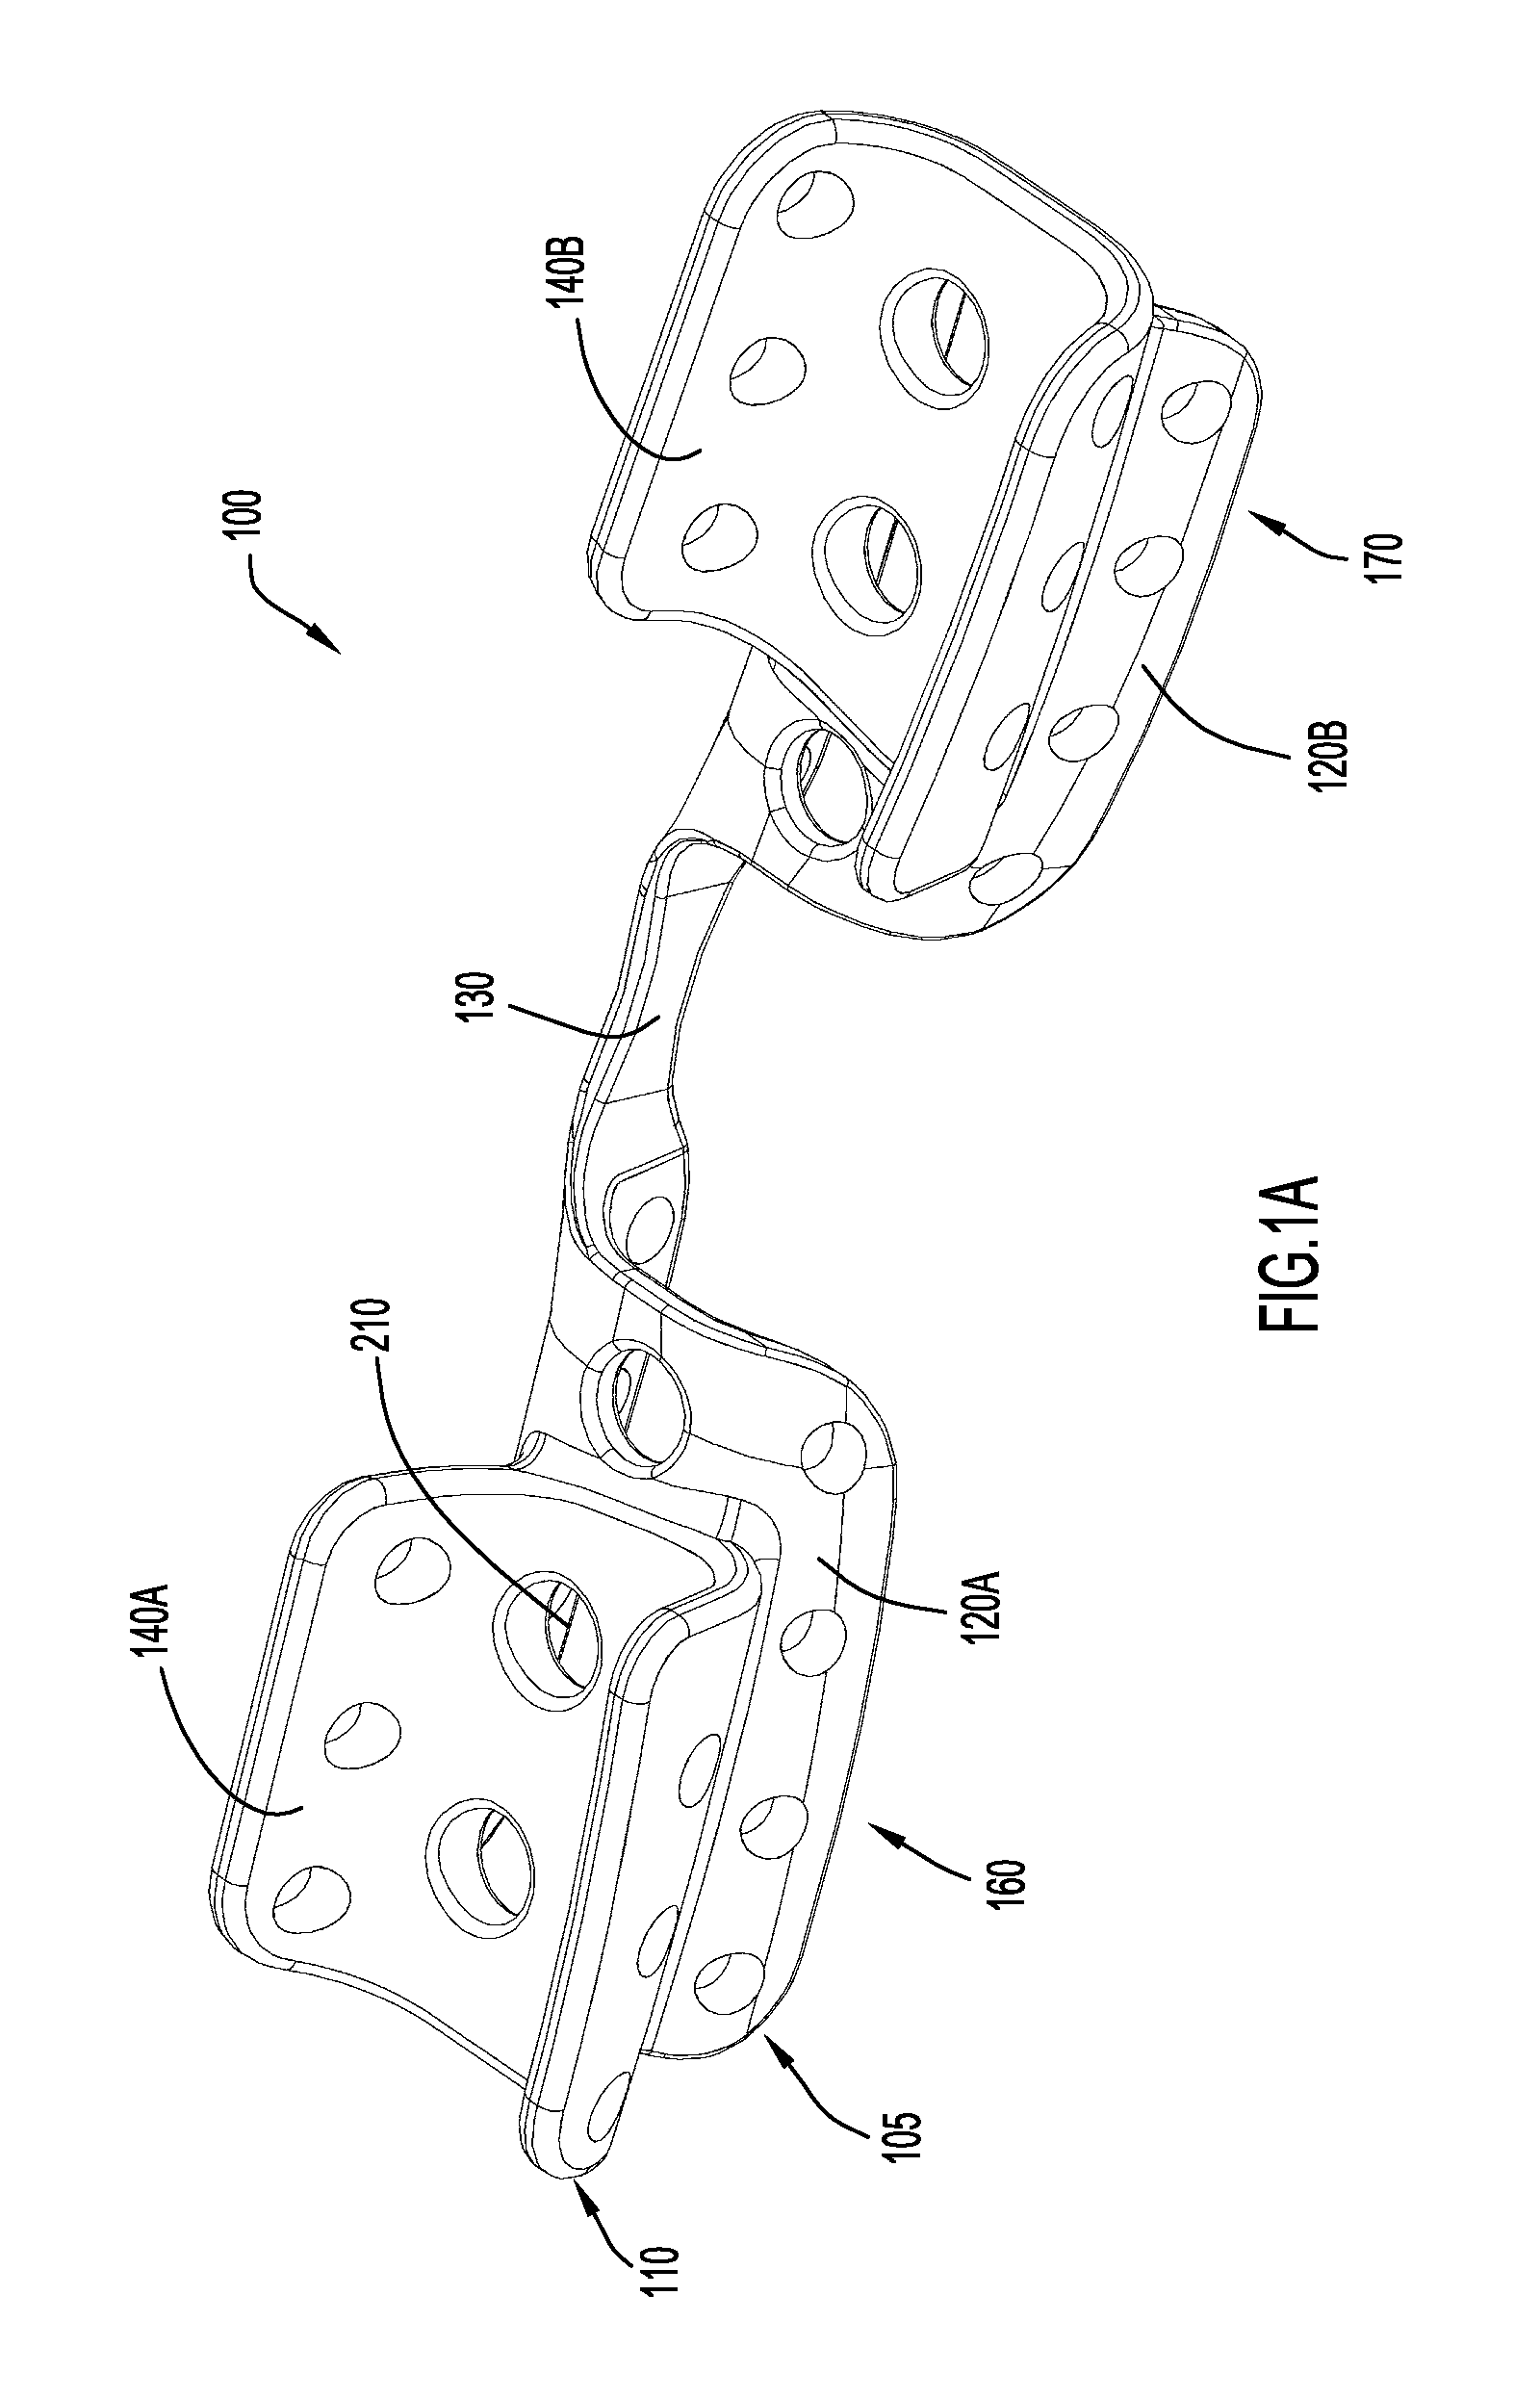 Oral appliance for improved nocturnal breathing